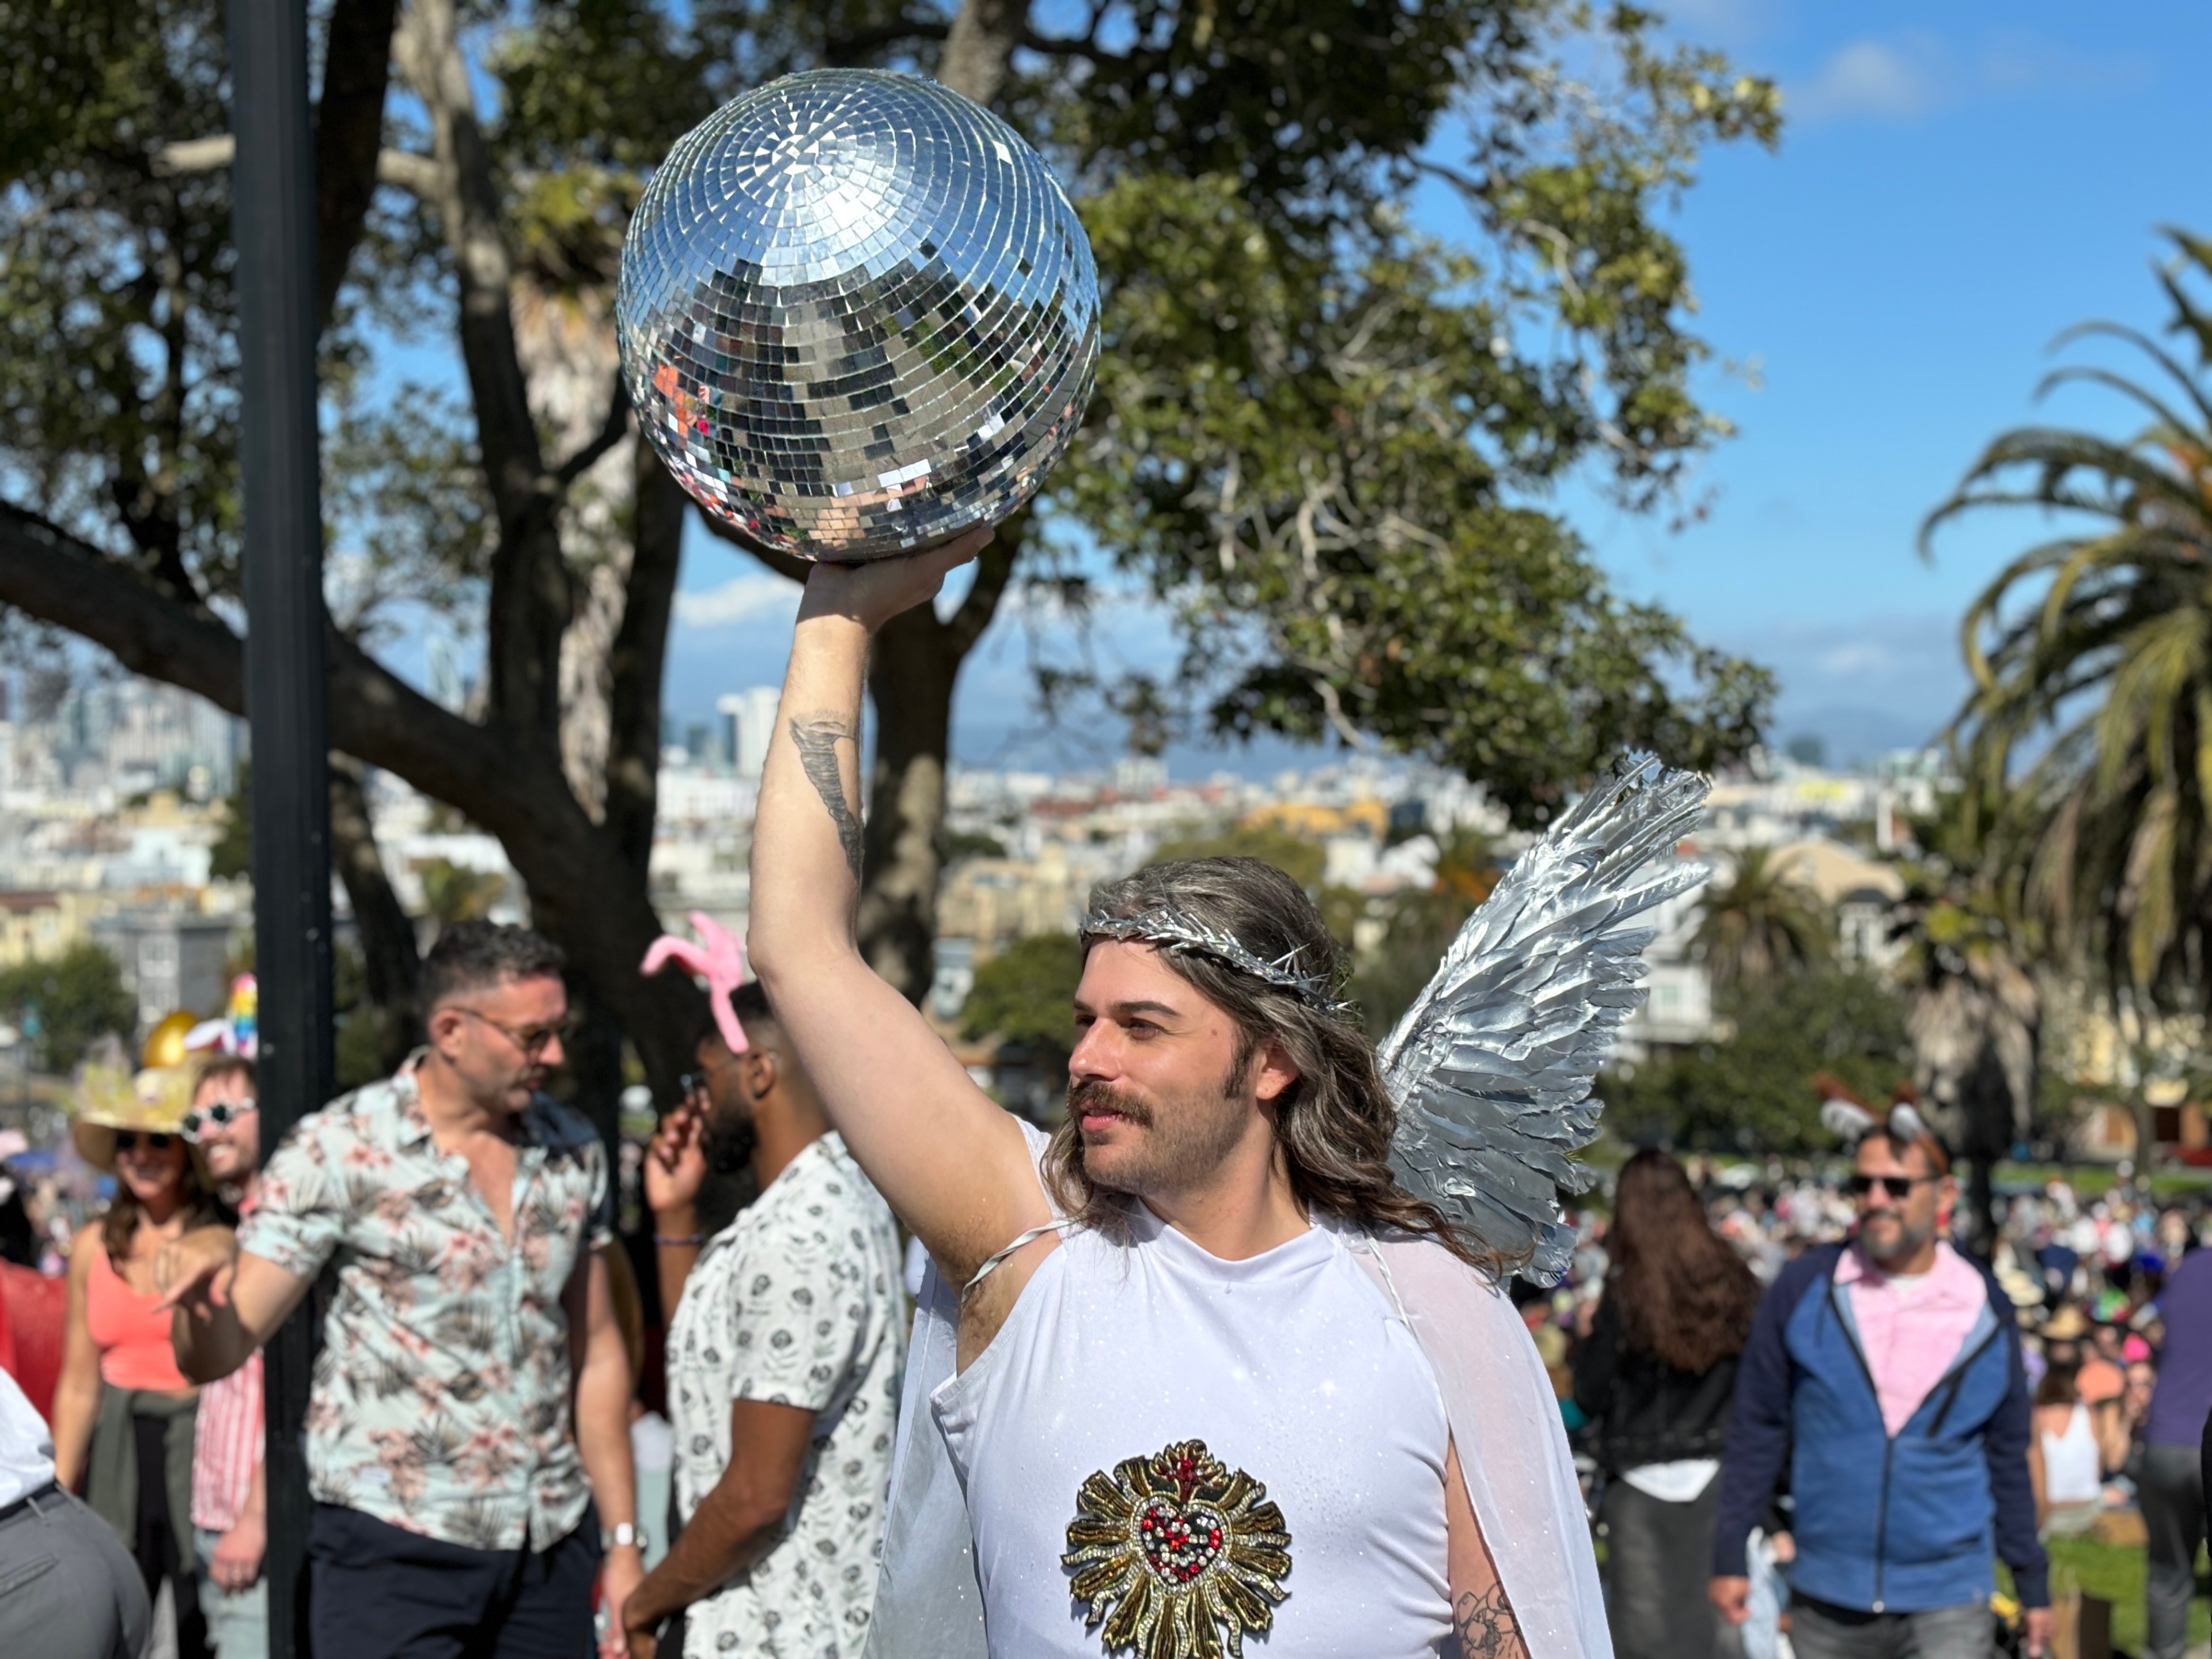 A person with a silver wing headband and wings raises a disco ball outdoors among a festive crowd.